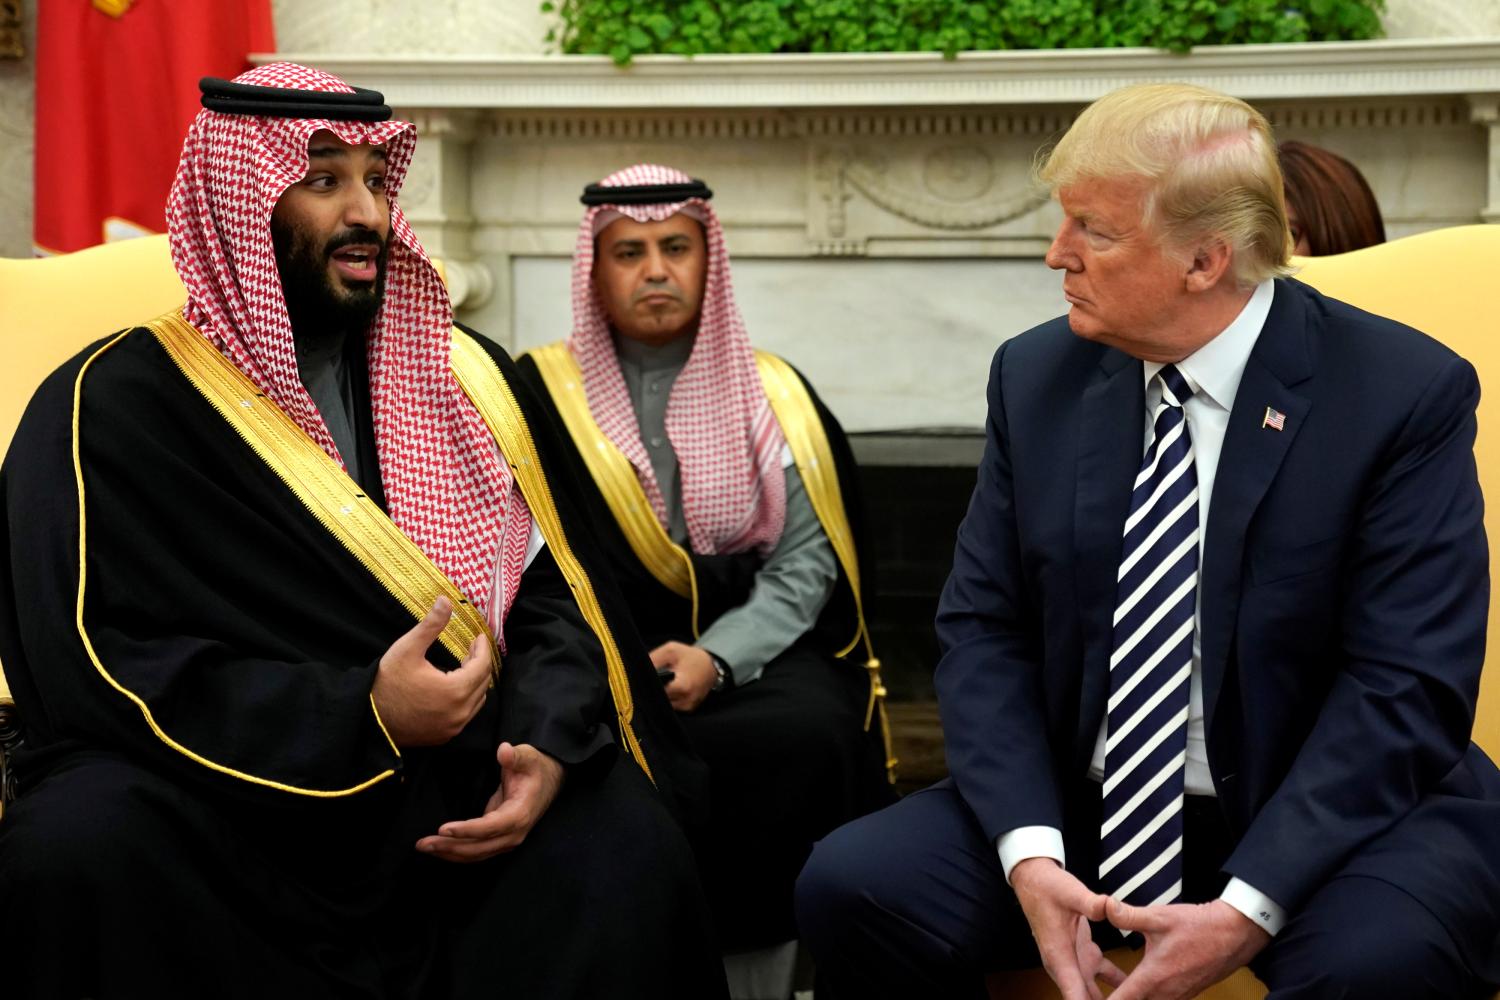 Saudi Arabia's Crown Prince Mohammed bin Salman delivers remarks as U.S. President Donald Trump welcomes him in the Oval Office at the White House in Washington, U.S. March 20, 2018.  REUTERS/Jonathan Ernst - RC1BA9175240